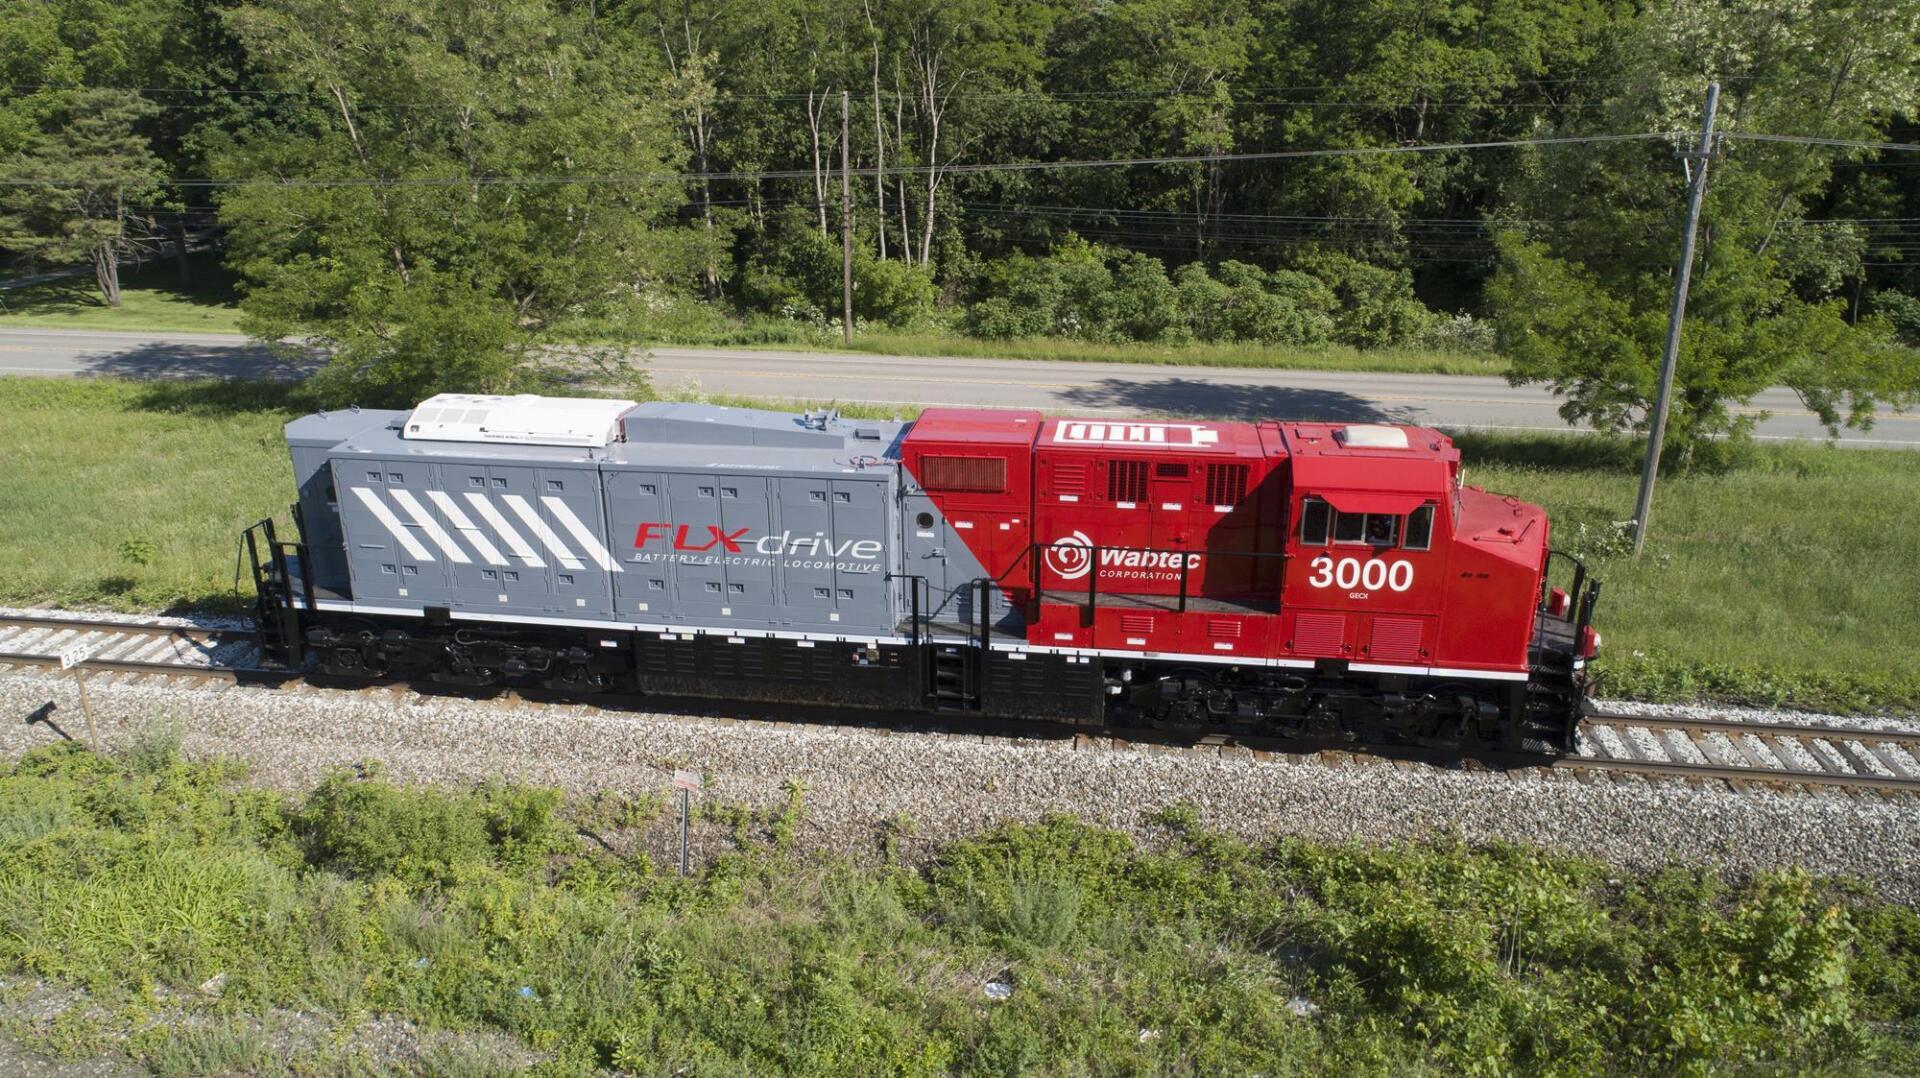 First battery-electric freight train: Wabtec Corporation sets world record